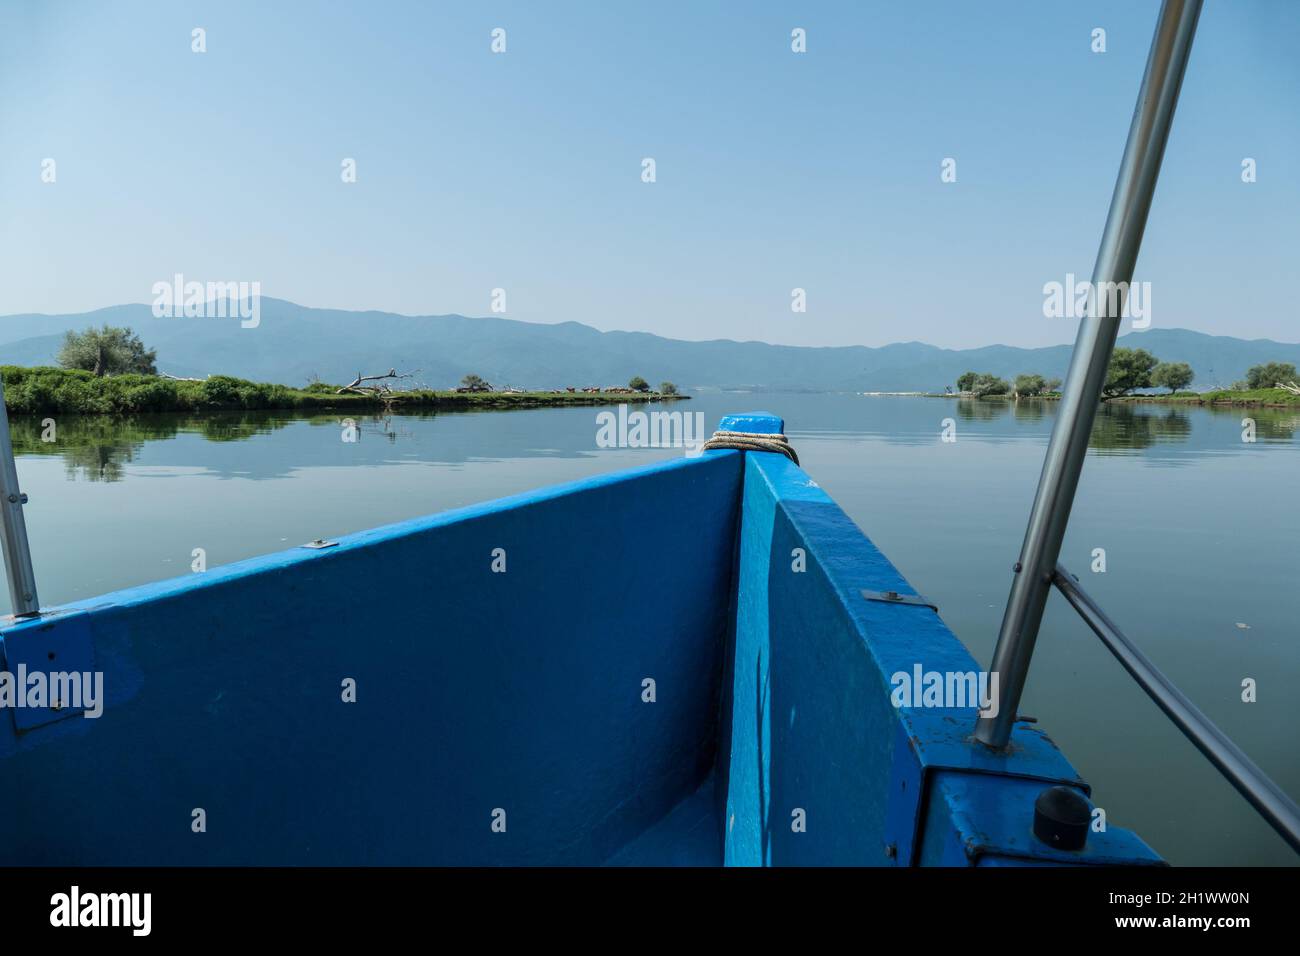 Lake Kerkini, Greece, July 13, 2021: Lake Kerkini is an artificial reservoir in Central Macedonia, Greece, created in 1932, then redeveloped in 1980, Stock Photo